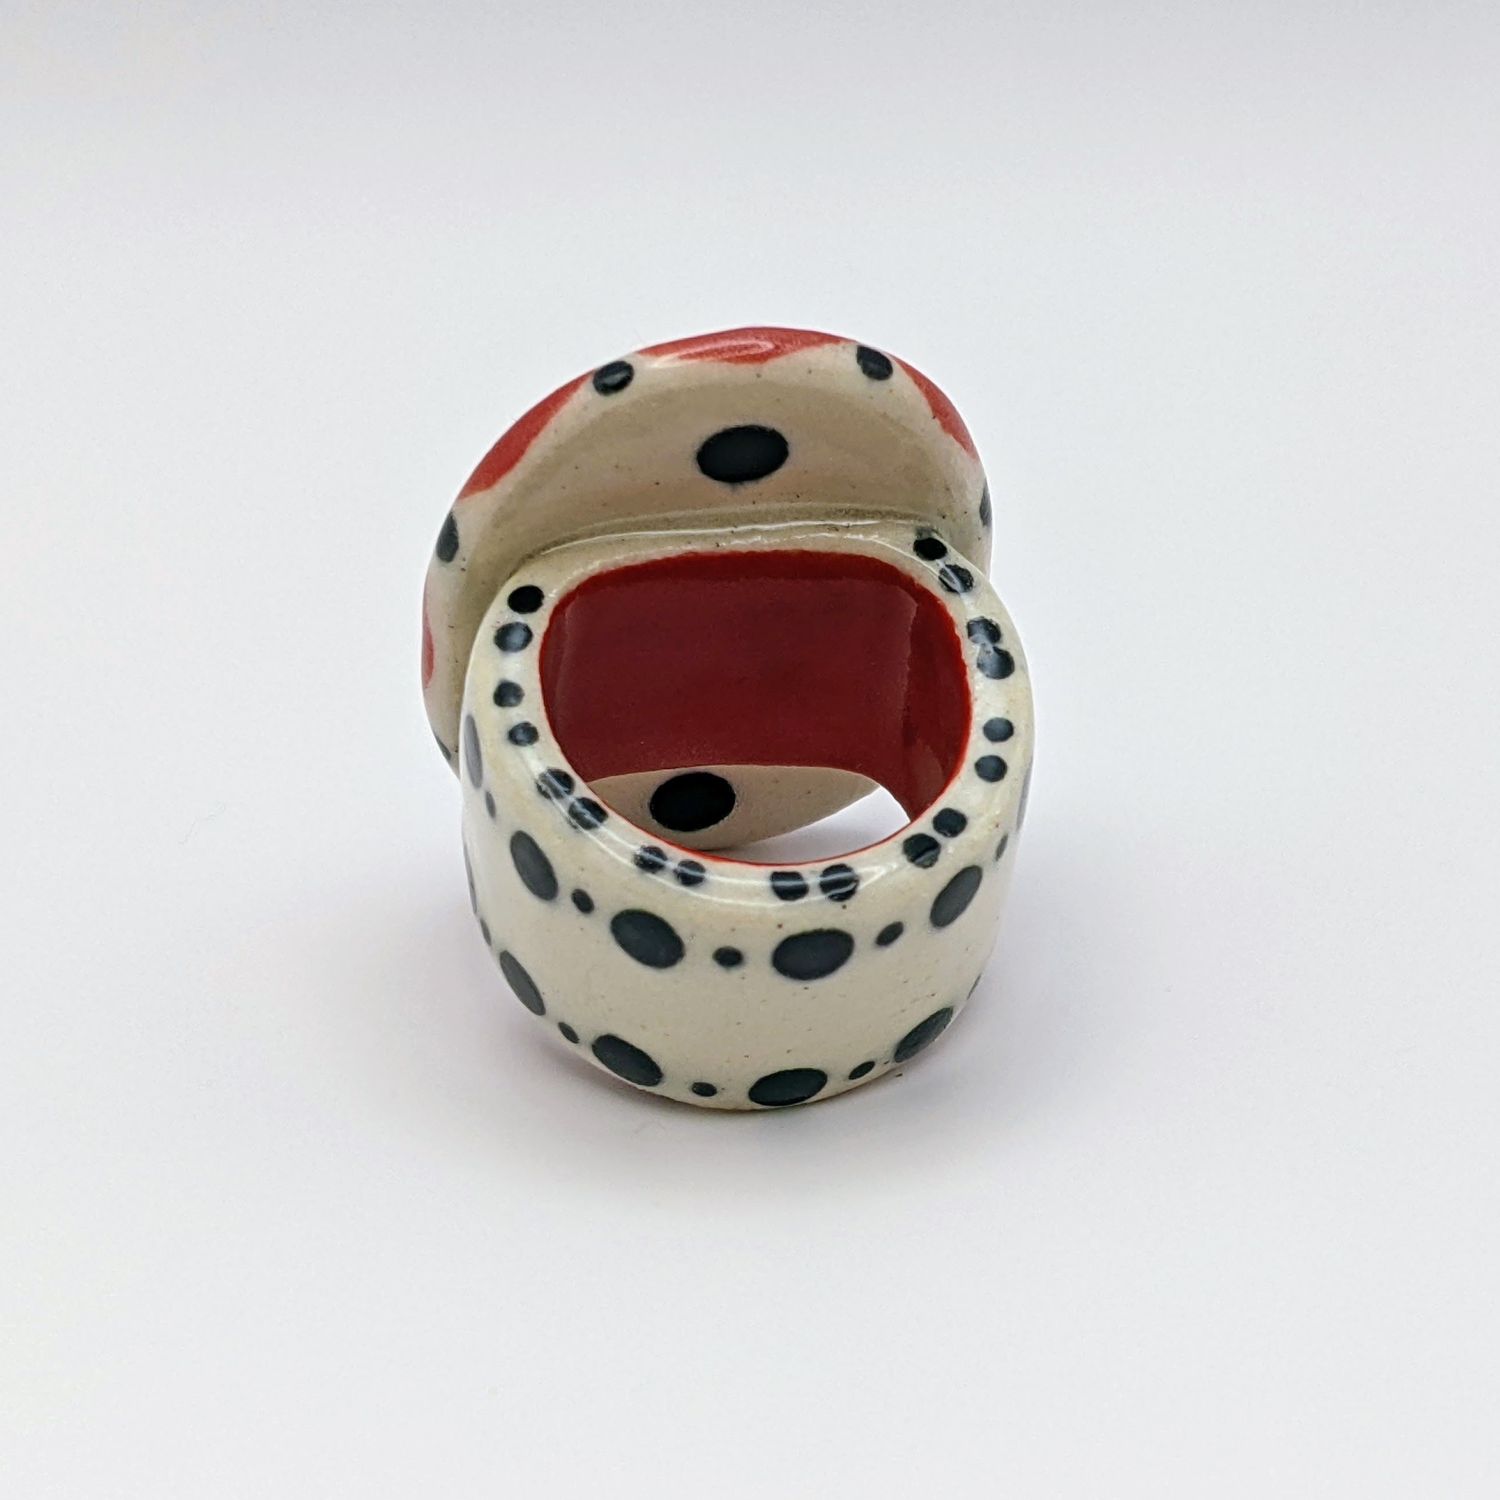 Here and Here: Red and Black Dot Ceramic Ring – Small Product Image 2 of 2